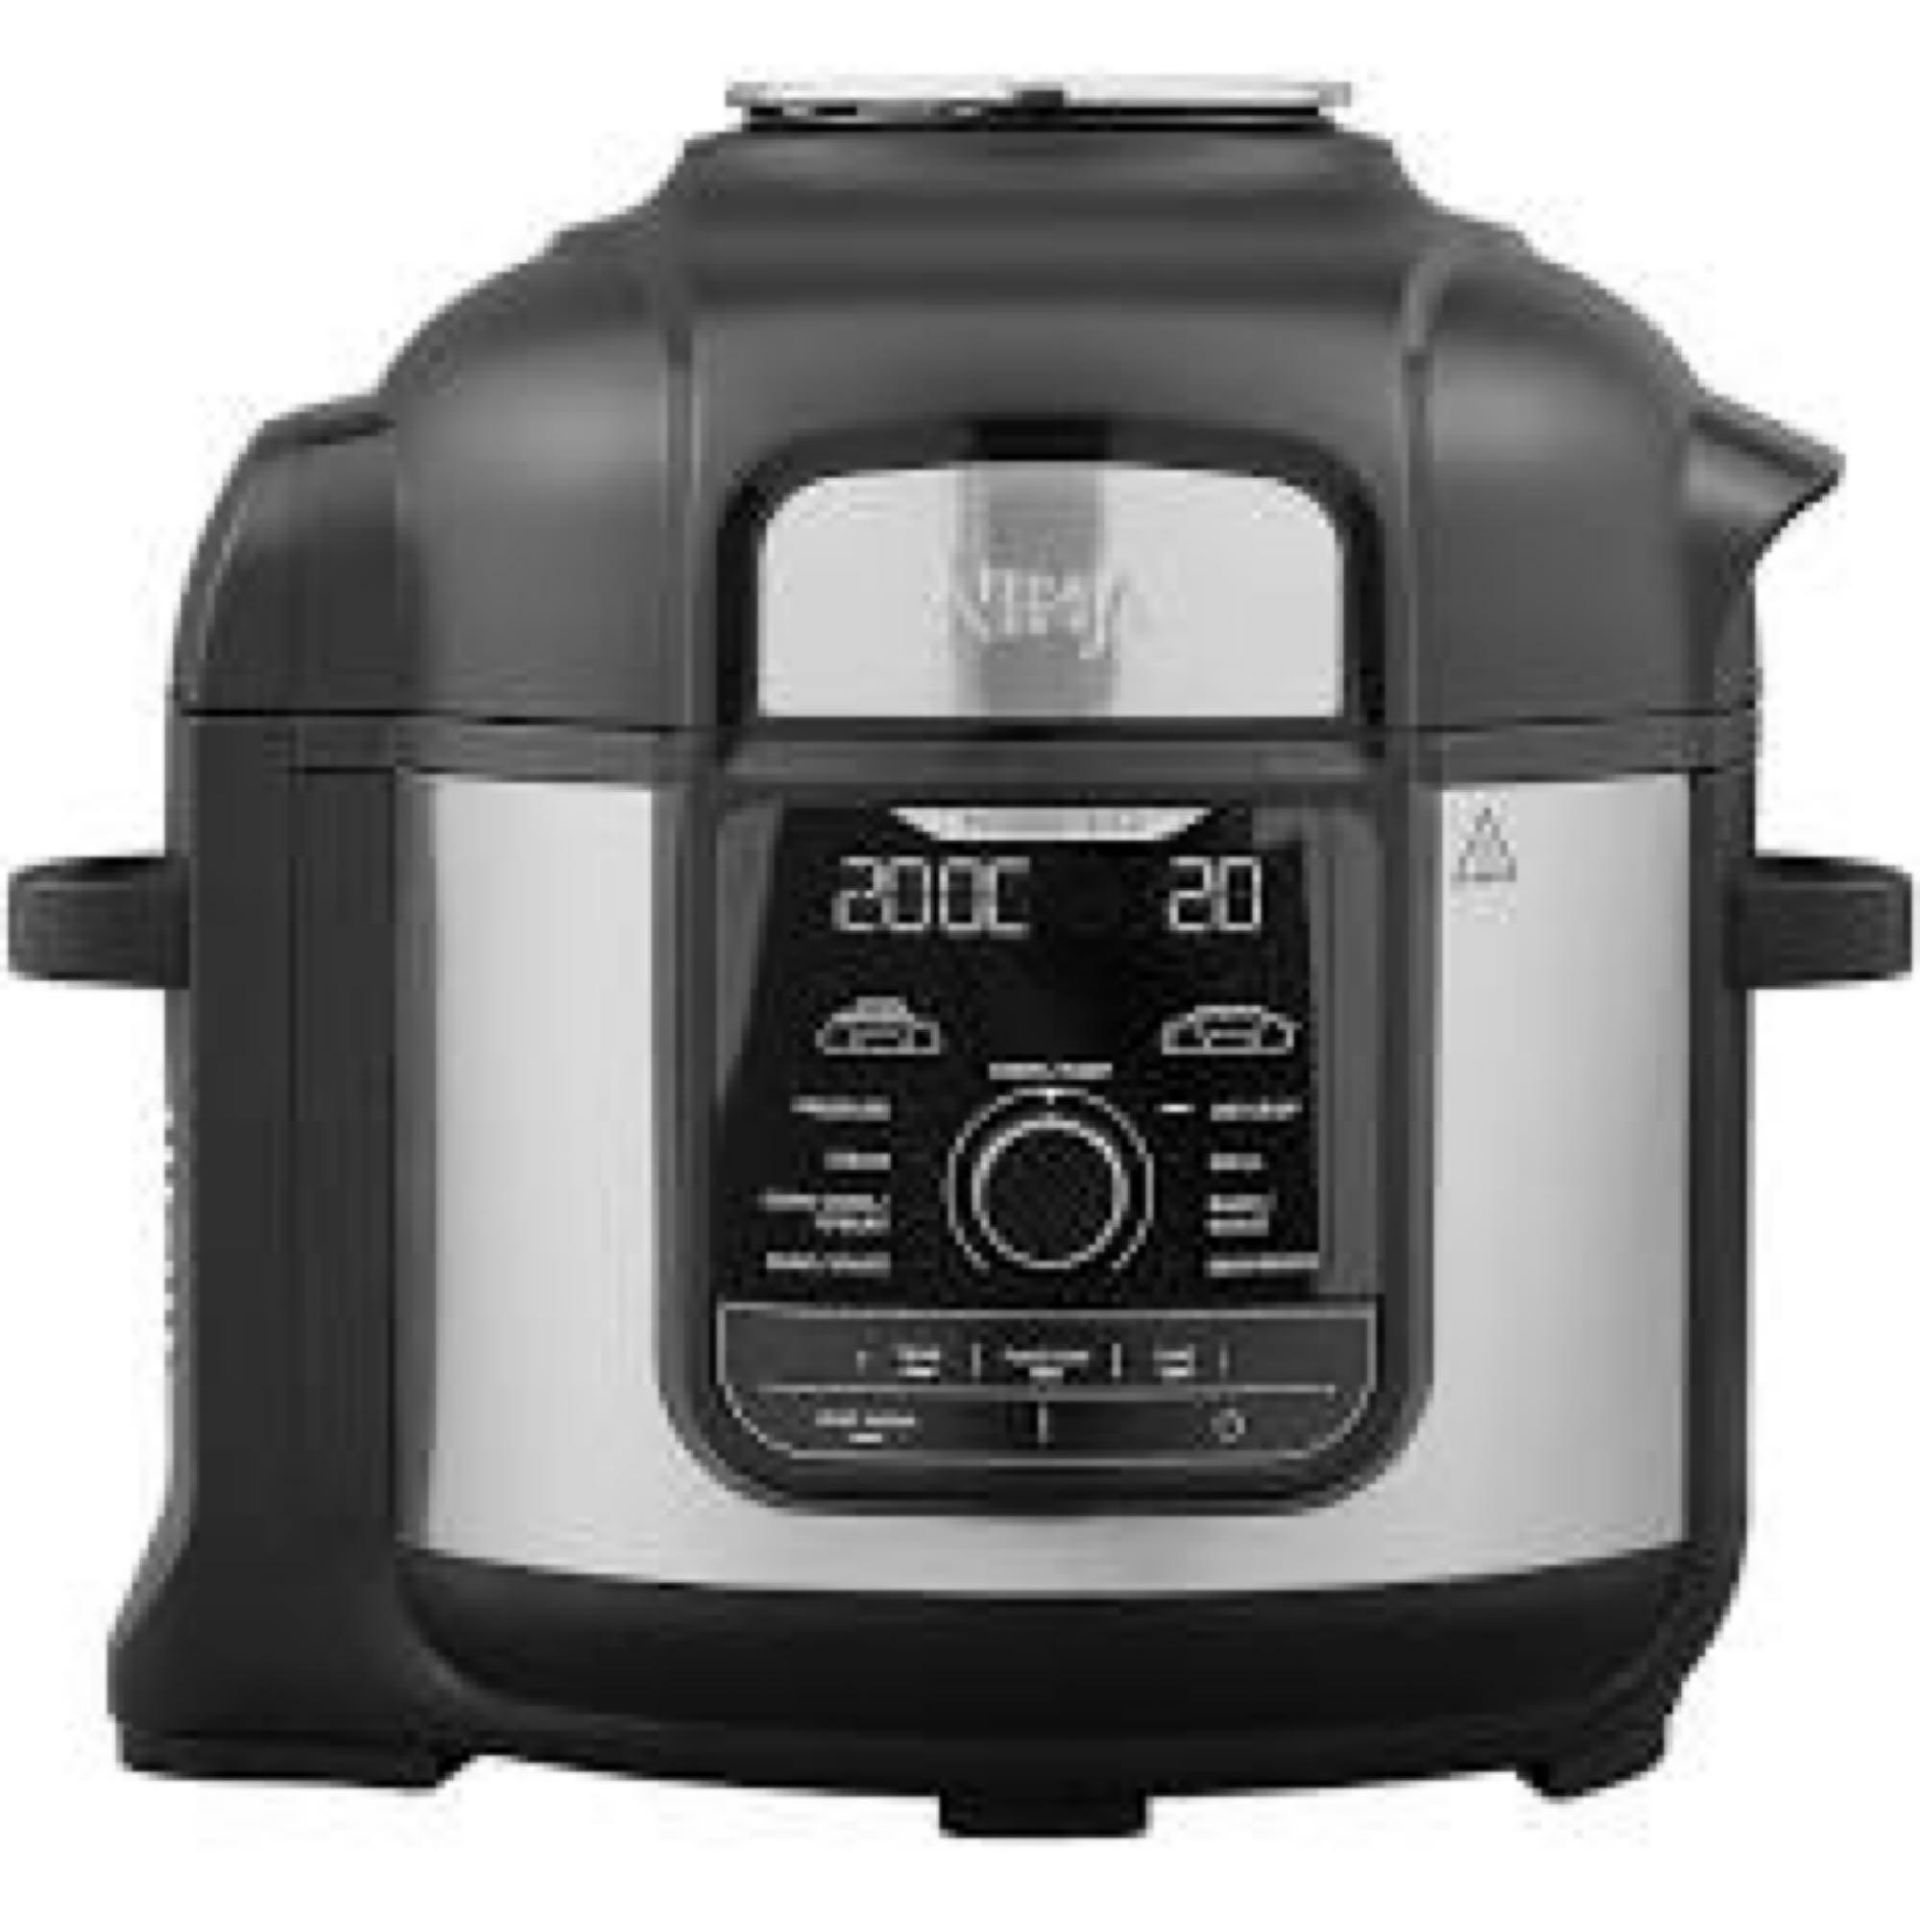 RRP £250 Boxed Ninja Foodi 9-1 Multi Cooker (Appraisal Available On Request) (Pictures For